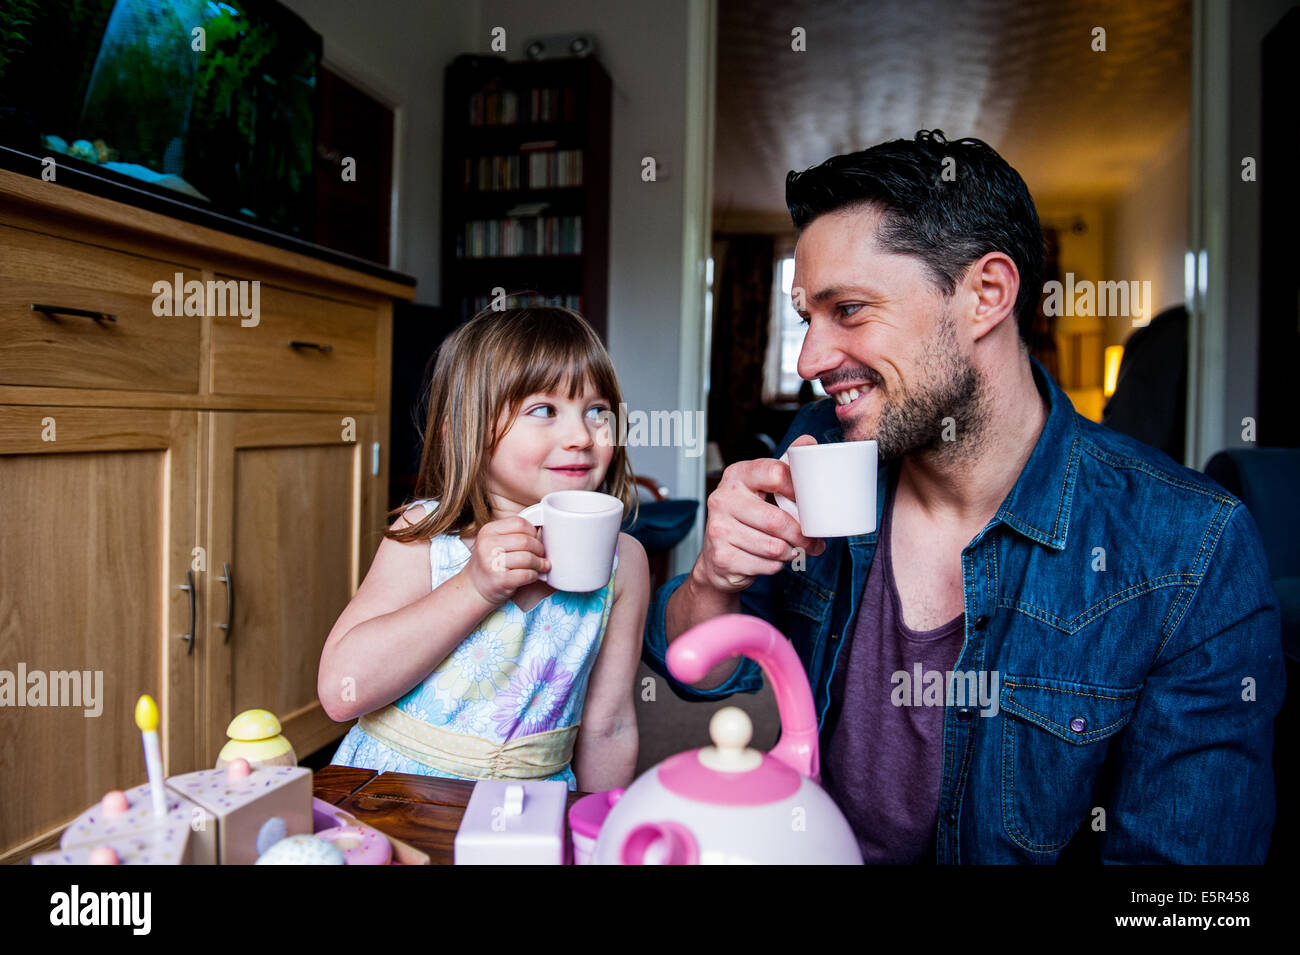 dad and daughter drinking tea and having fun Stock Photo